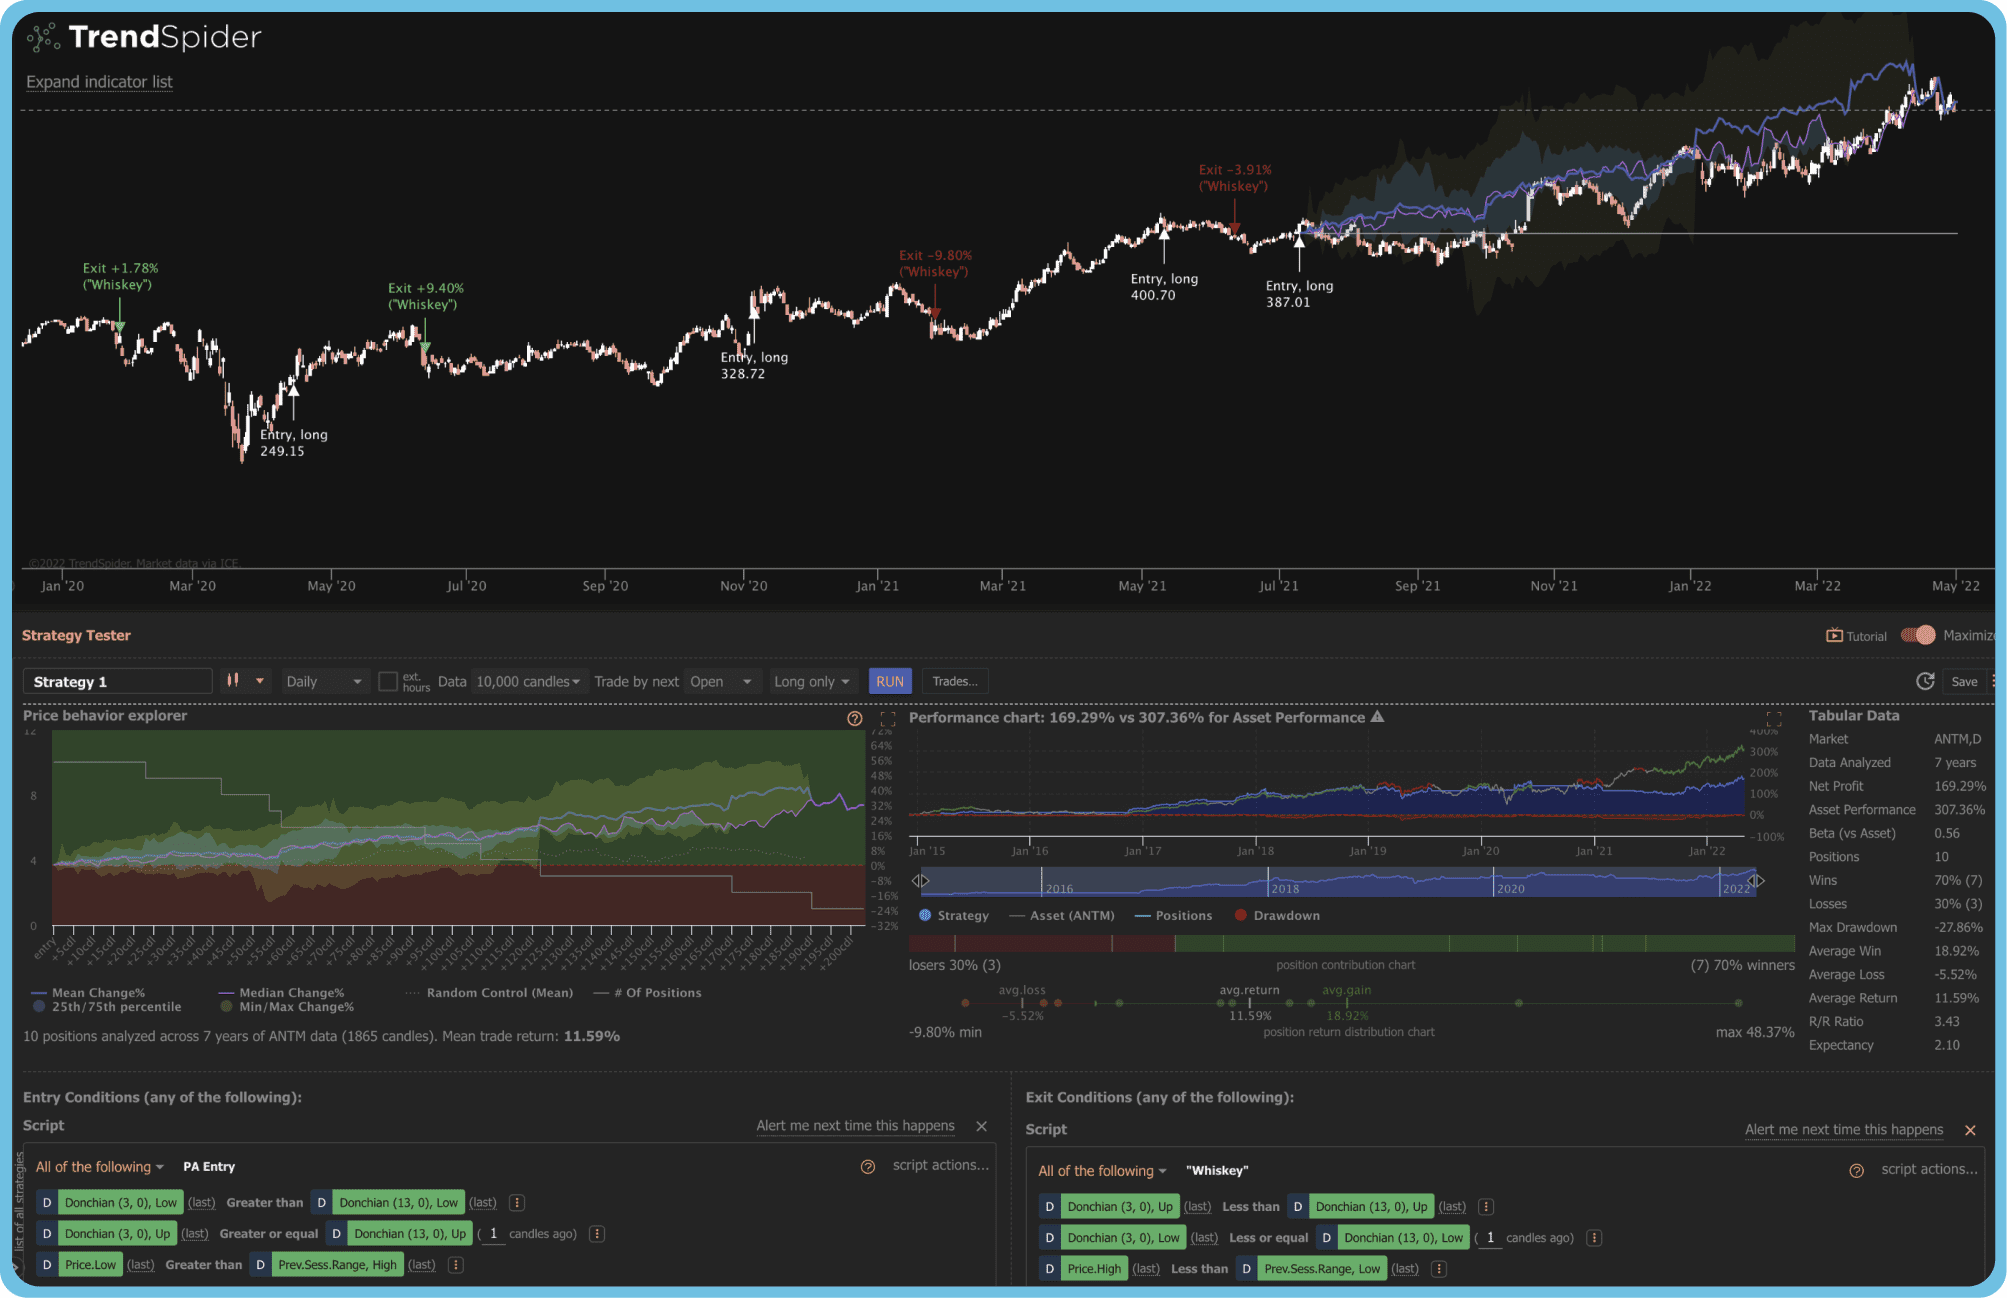 Image of Trendspider, a trading platform for daytrading. The image is showing a trading platform for stocks and a graph showing the day stock average